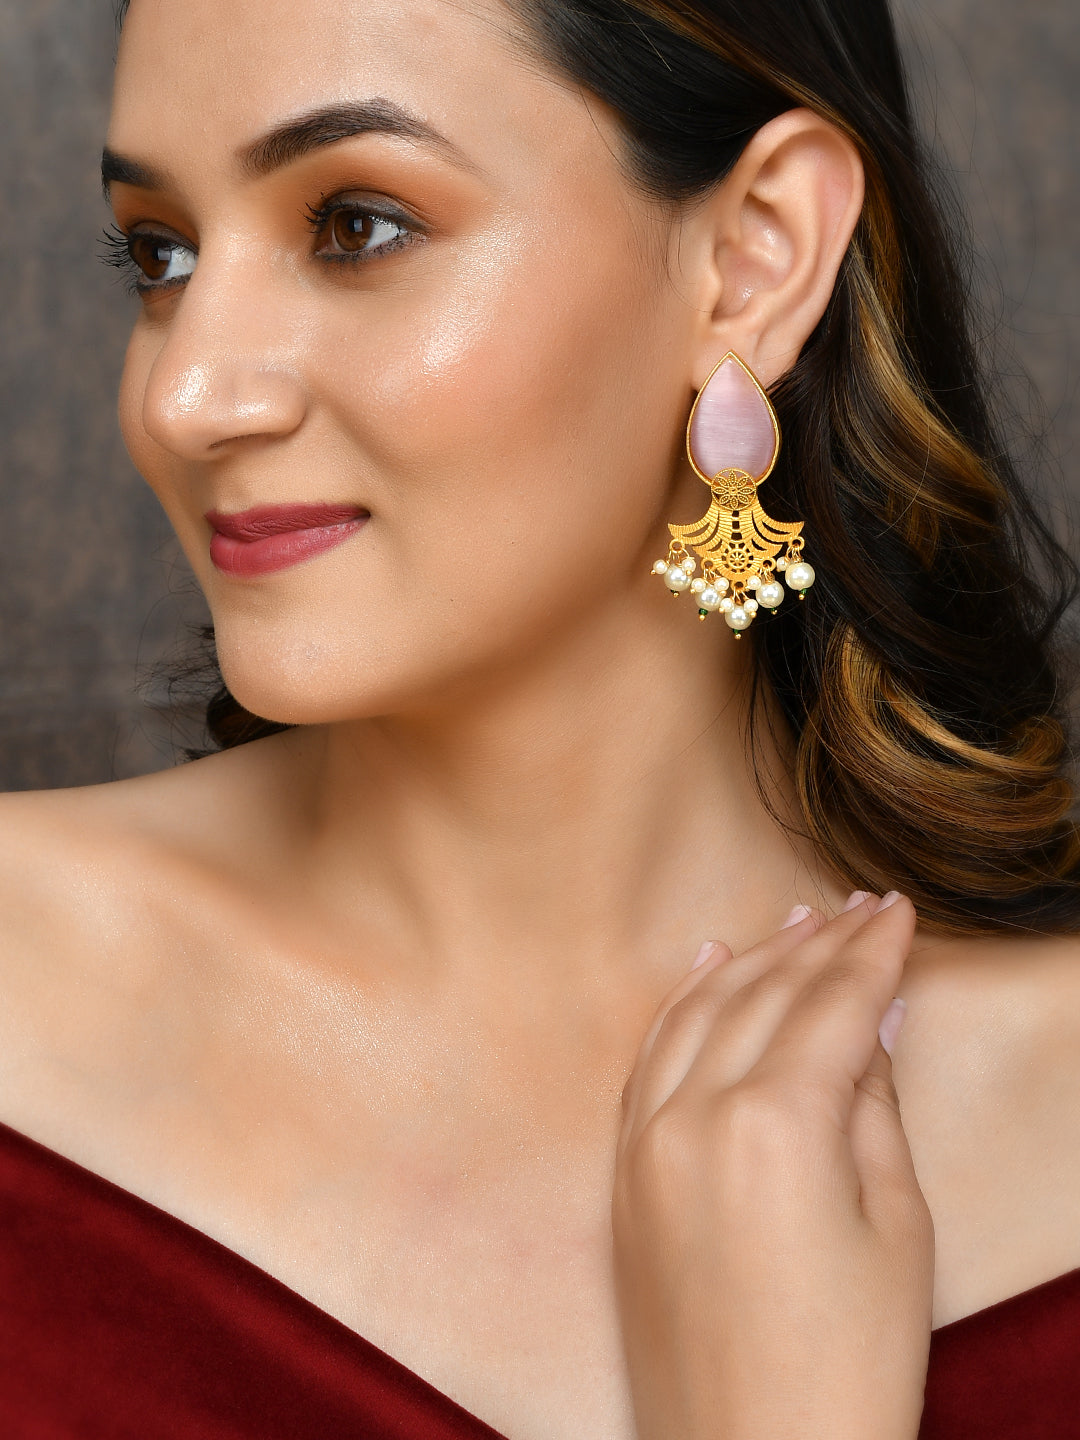 Gold-Toned Contemporary Jhumkas Earrings